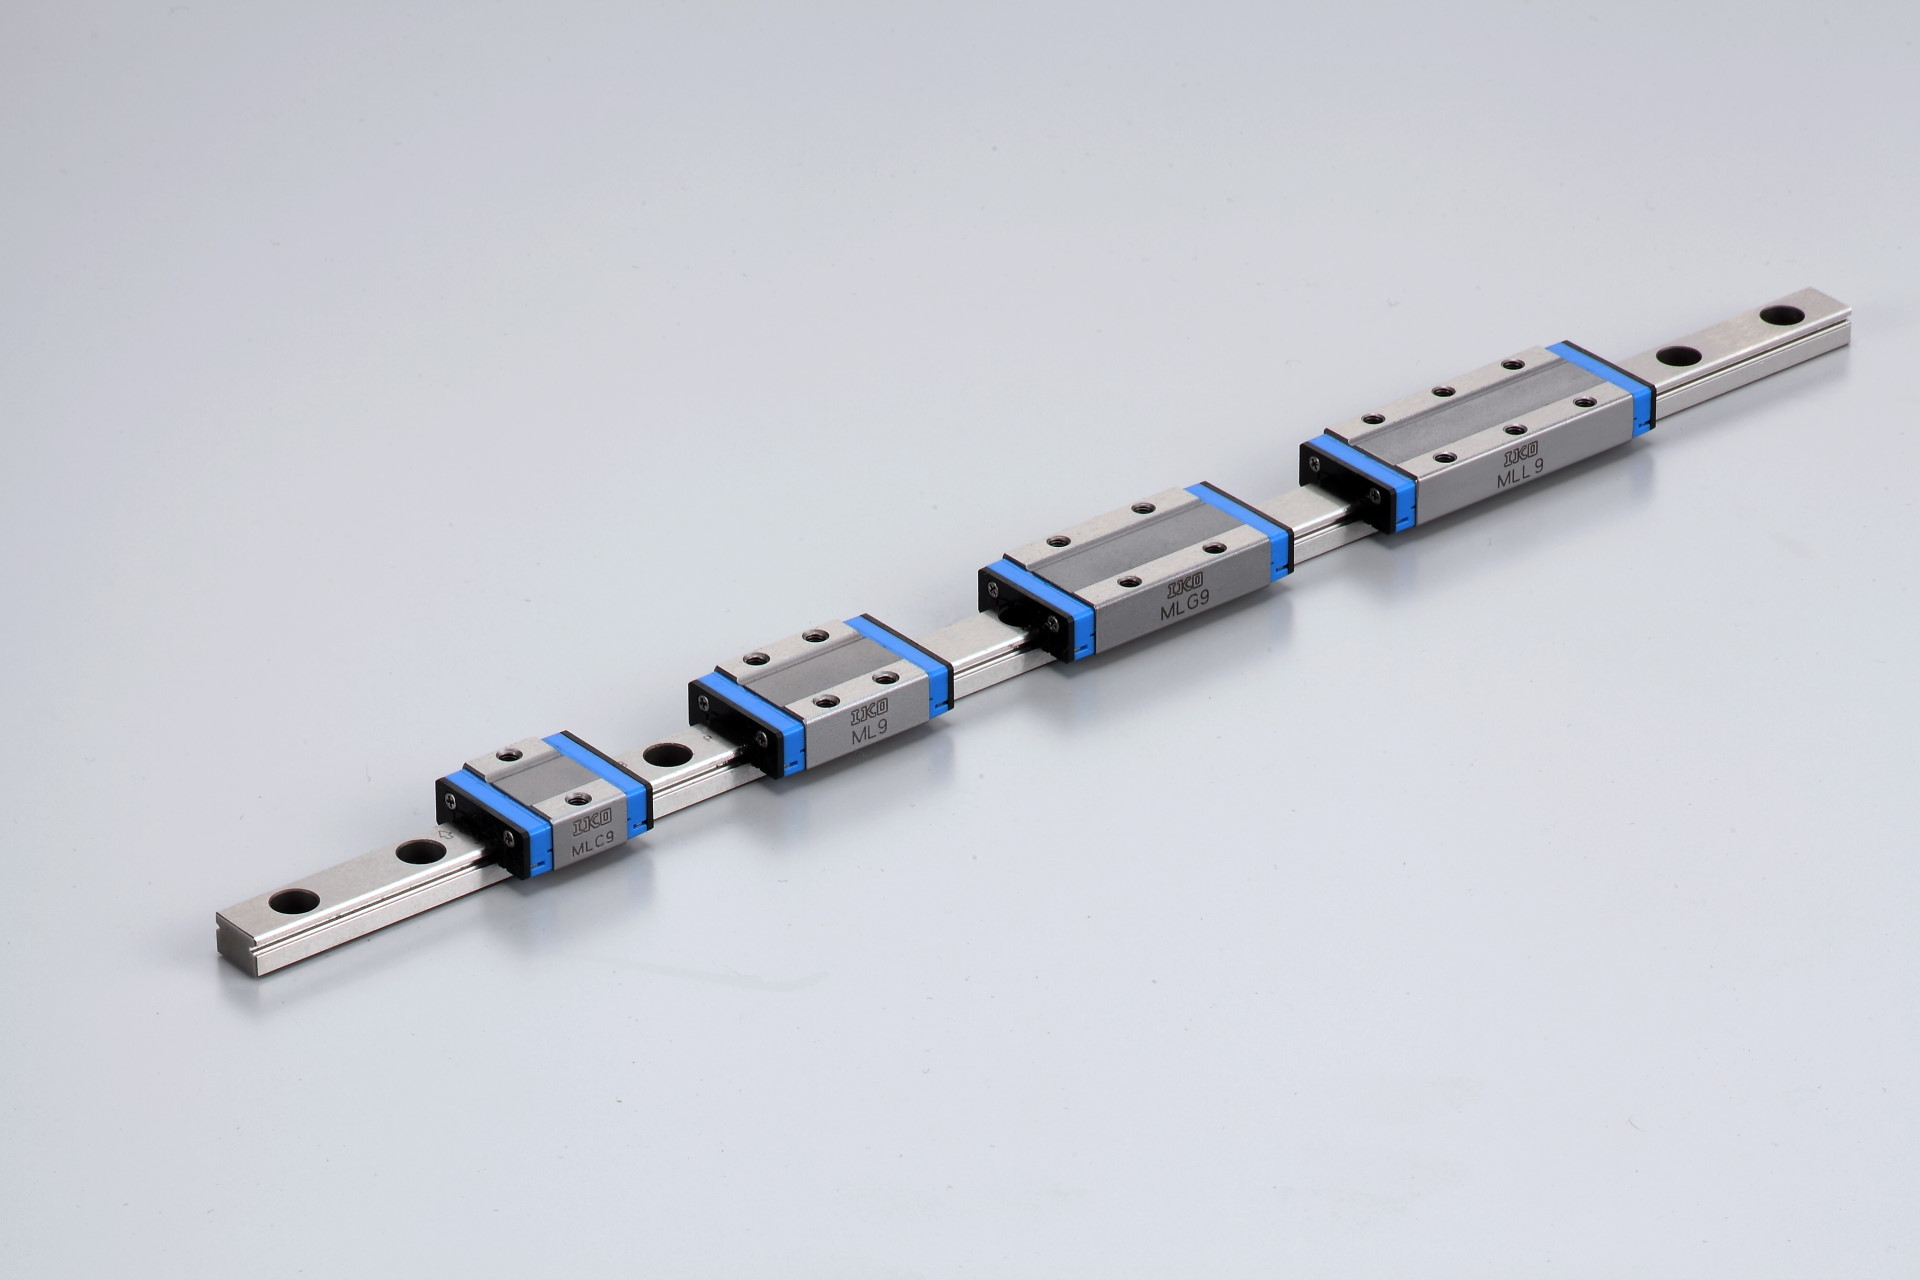 Linear Motion Guides Deliver Precise Positioning and Premium Features at No Additional Cost